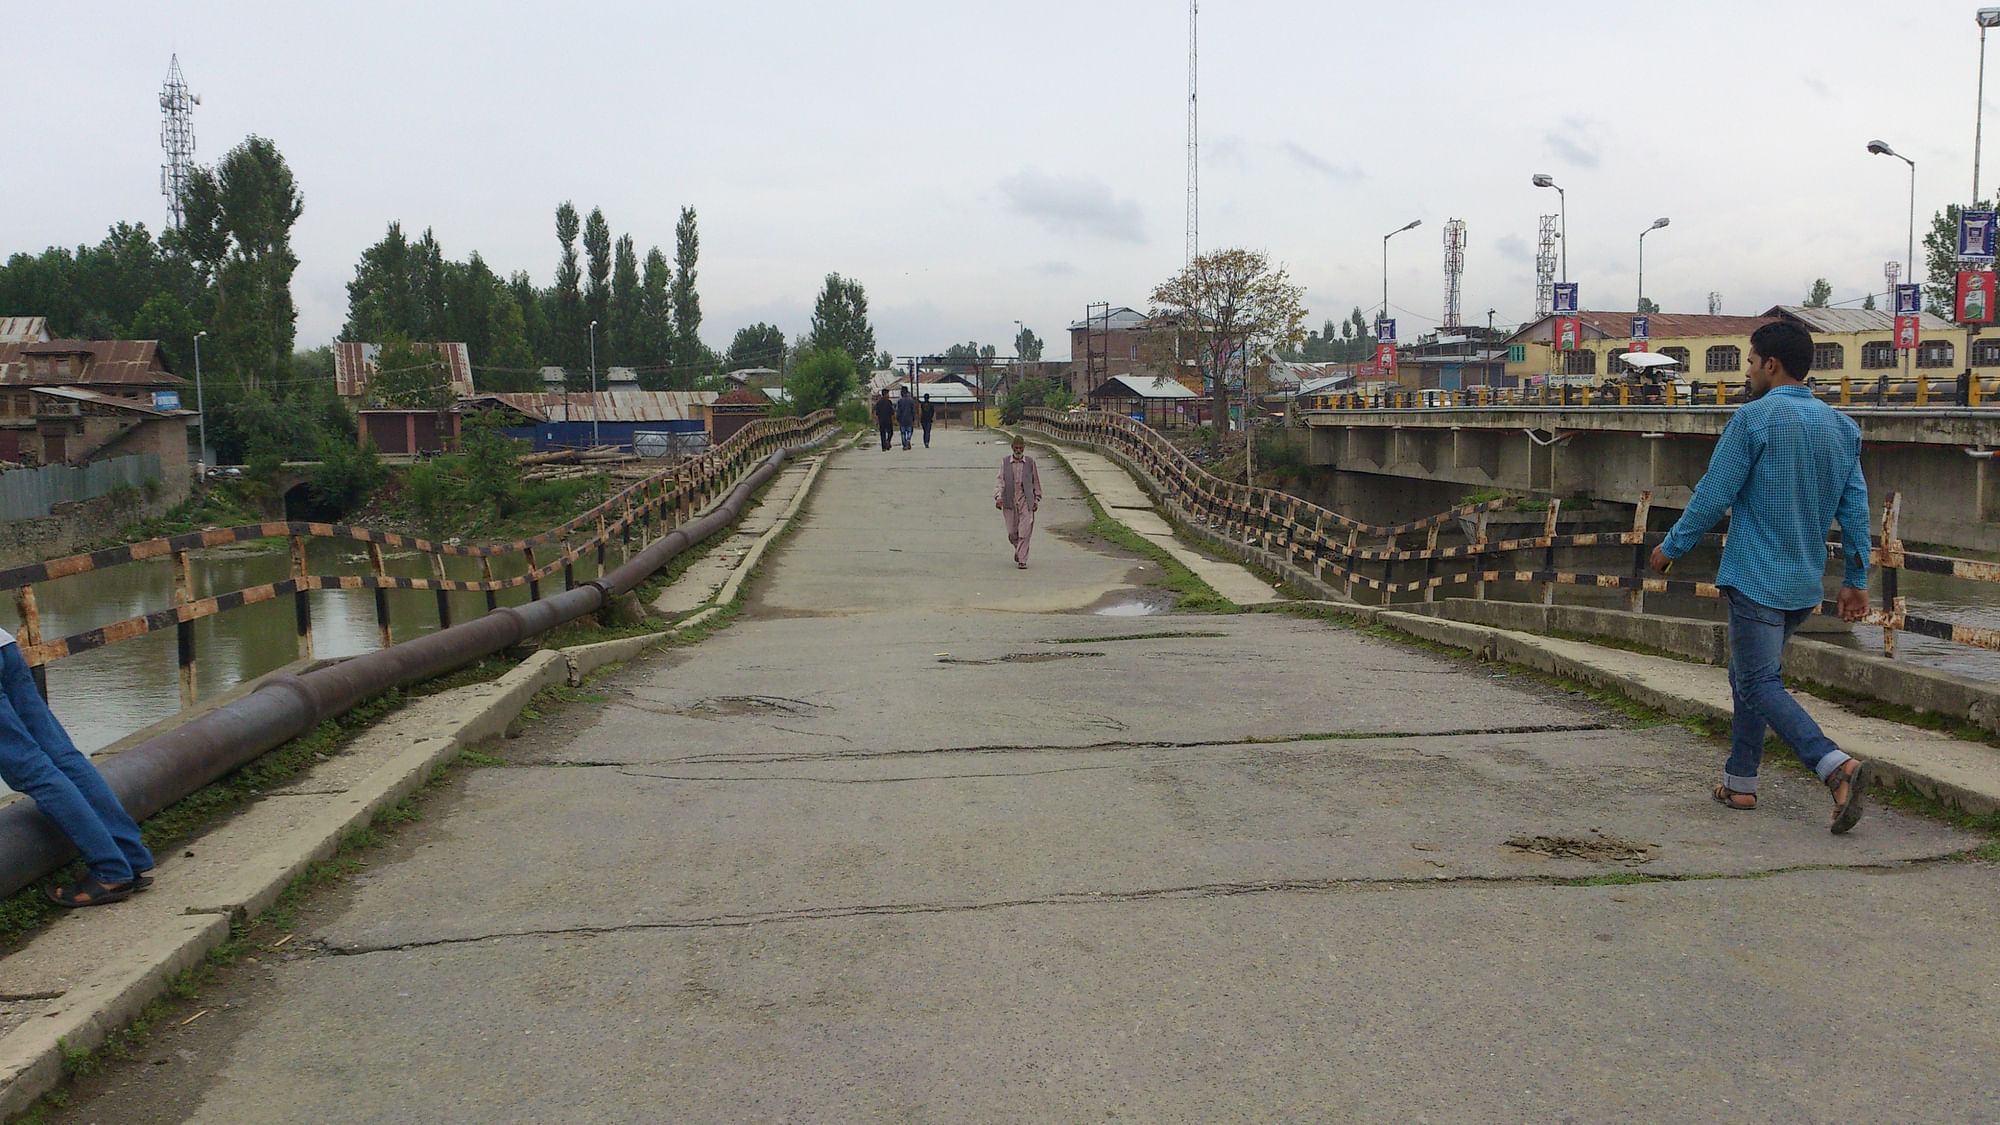  Development has suffered a major setback in Sopore over the last two decades of violence in J&amp;K. (Photo: Jehangir Ali)